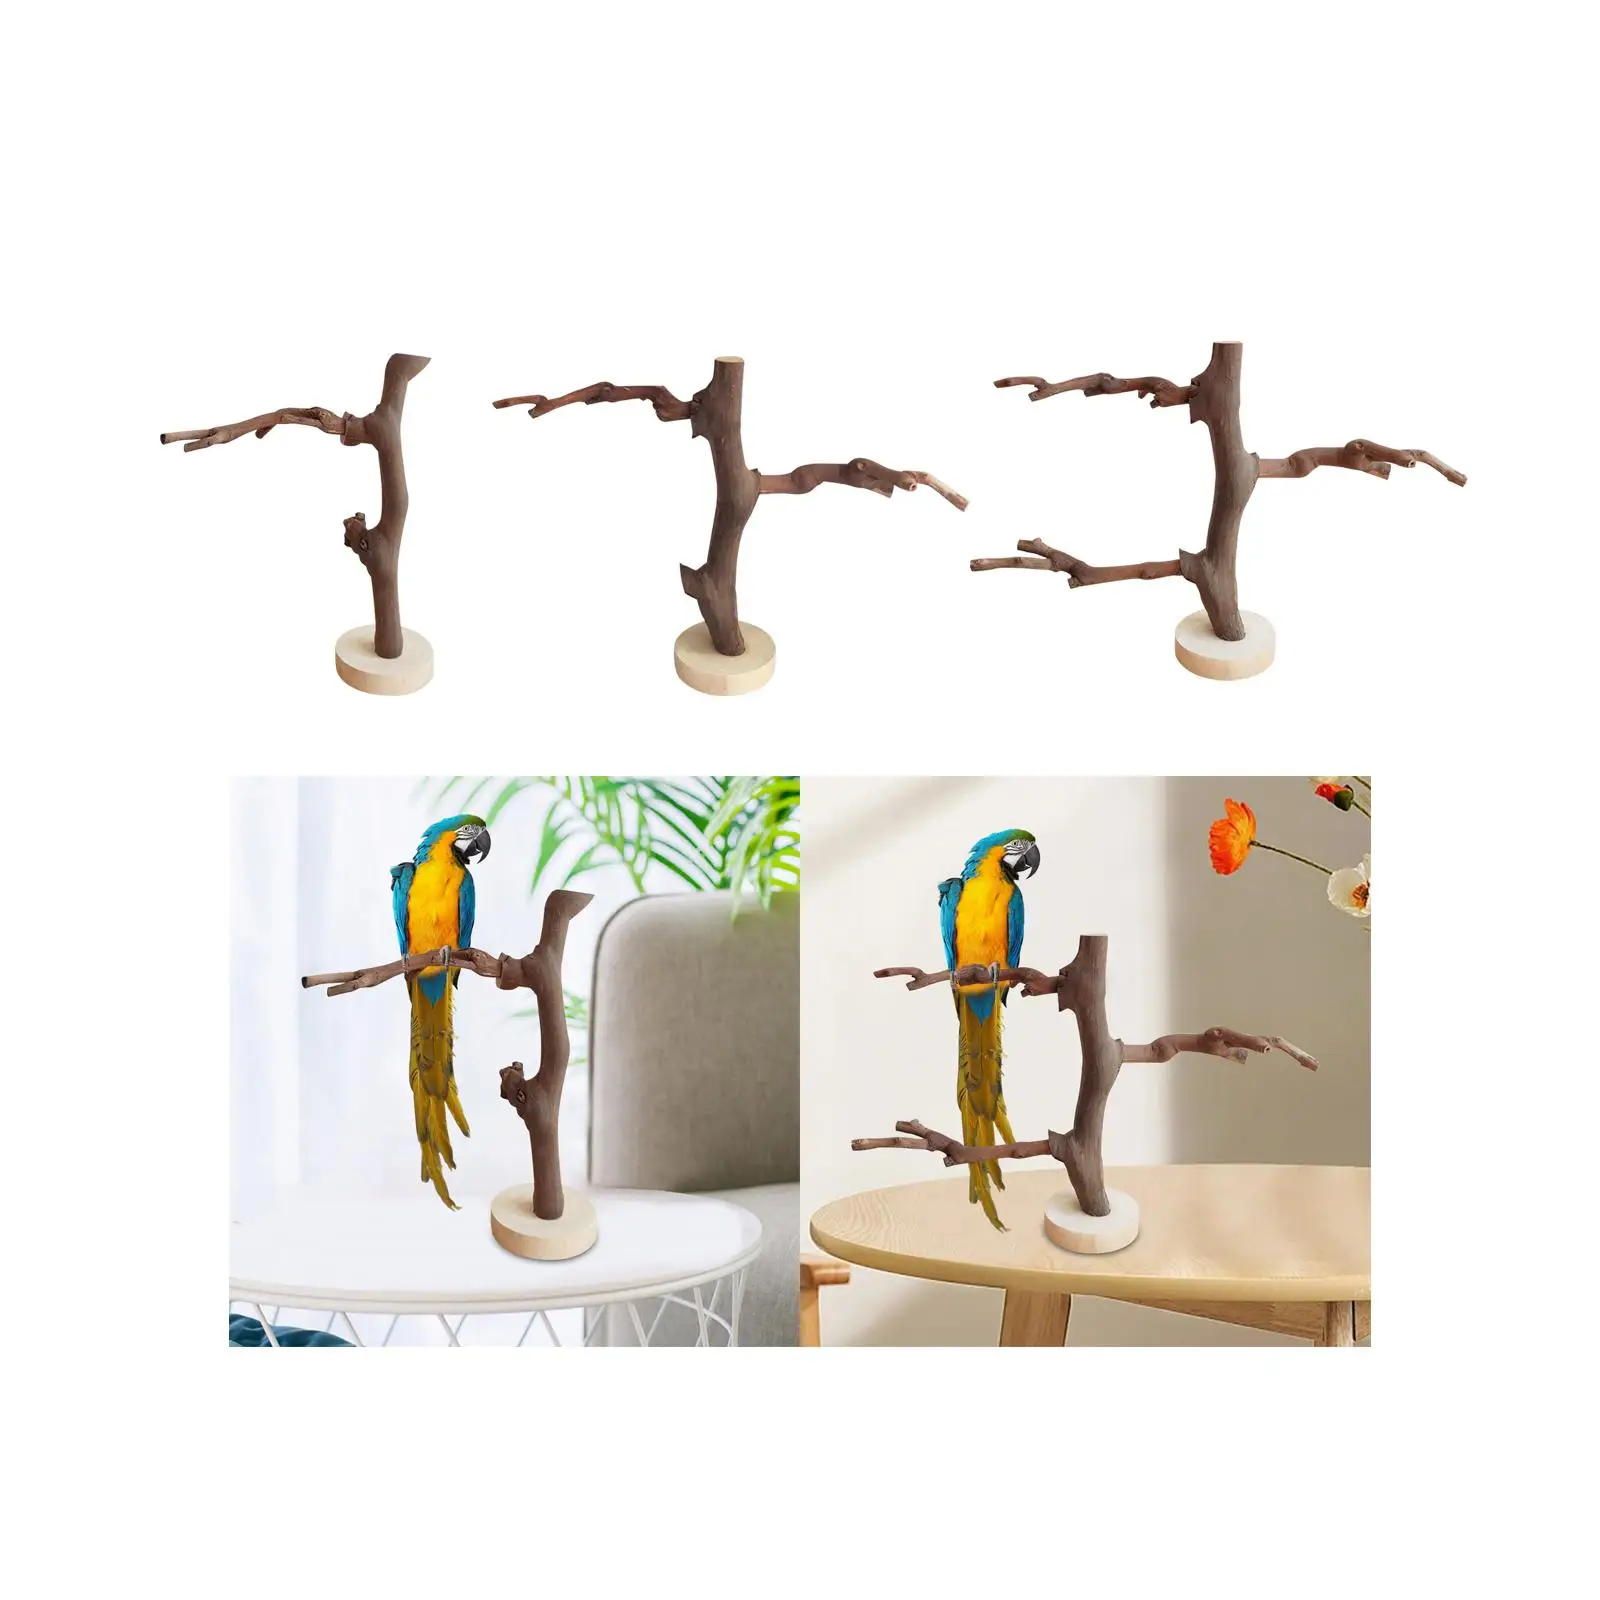 Parrot Stand Birdcage Tabletop Bird Stand Portable Sturdy Parrot Perches Outdoor Wooden for Cockatiels Pet Parrots Training Toy